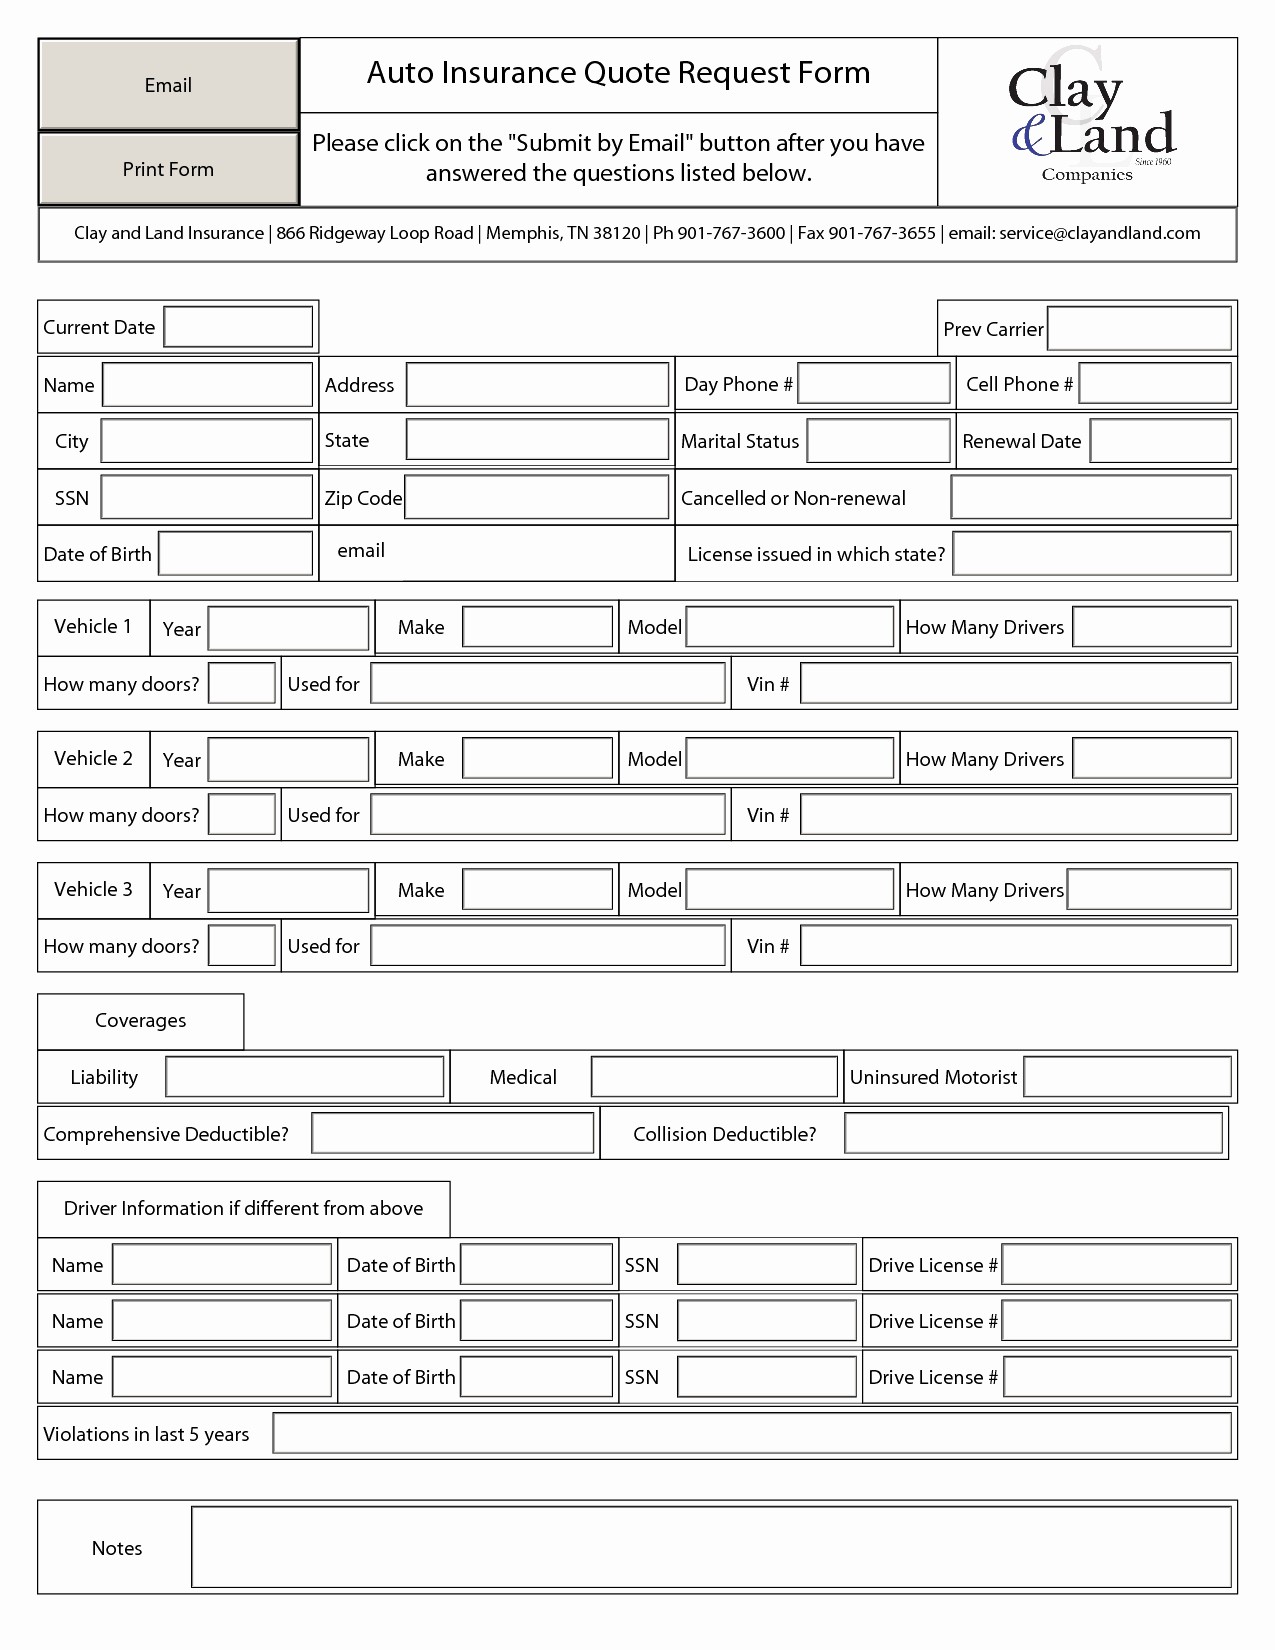 Auto Insurance Comparison Excel Spreadsheet Awesome Document